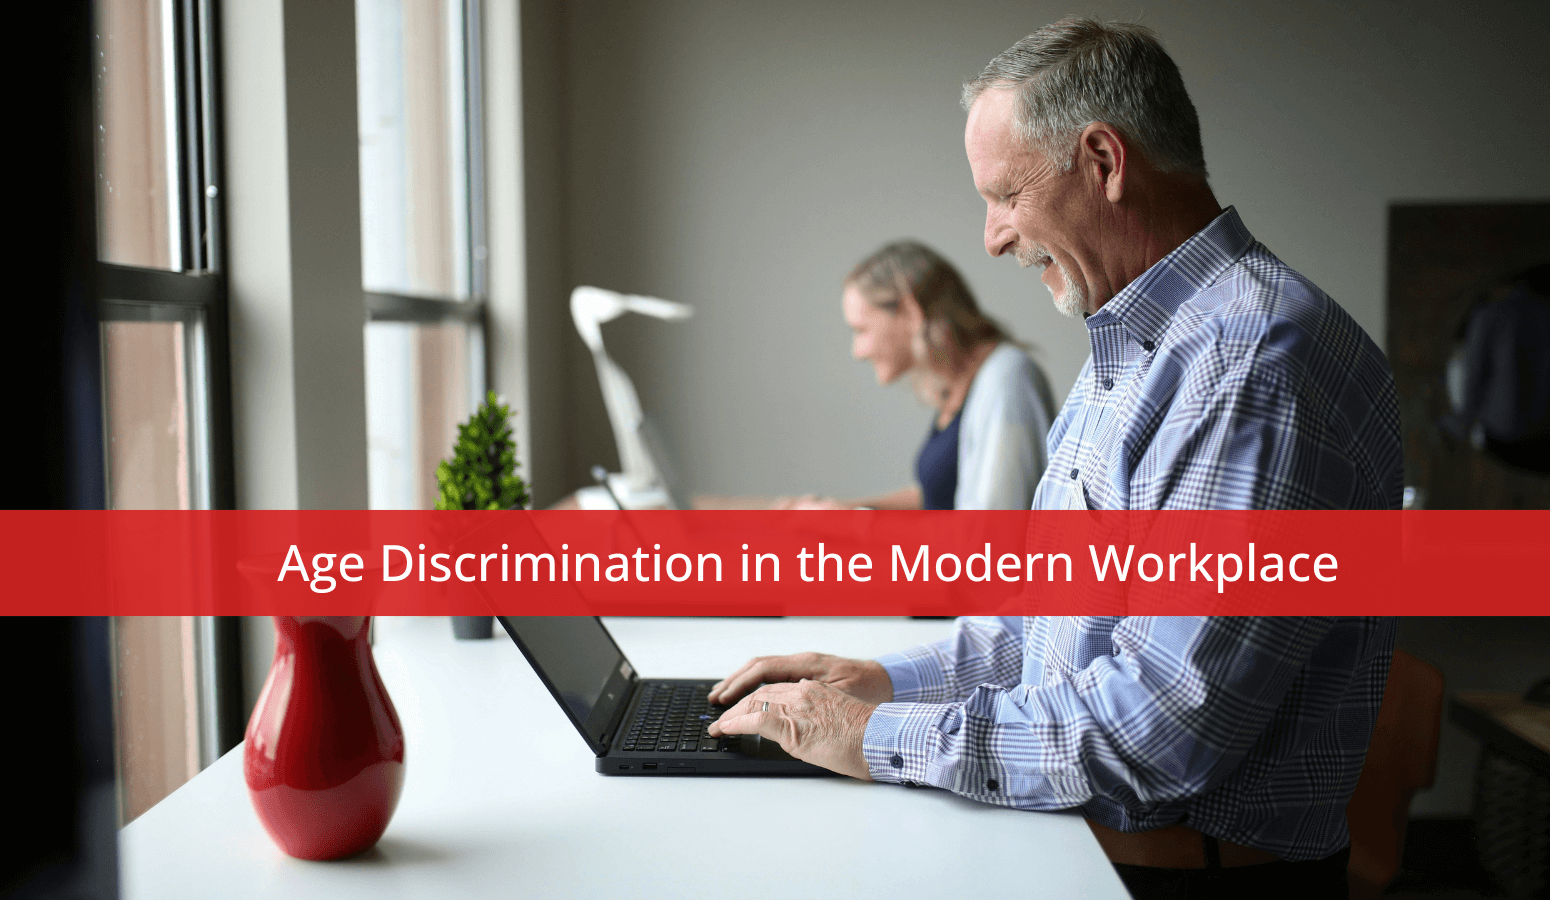 Featured image for “Age Discrimination in the Modern Workplace”